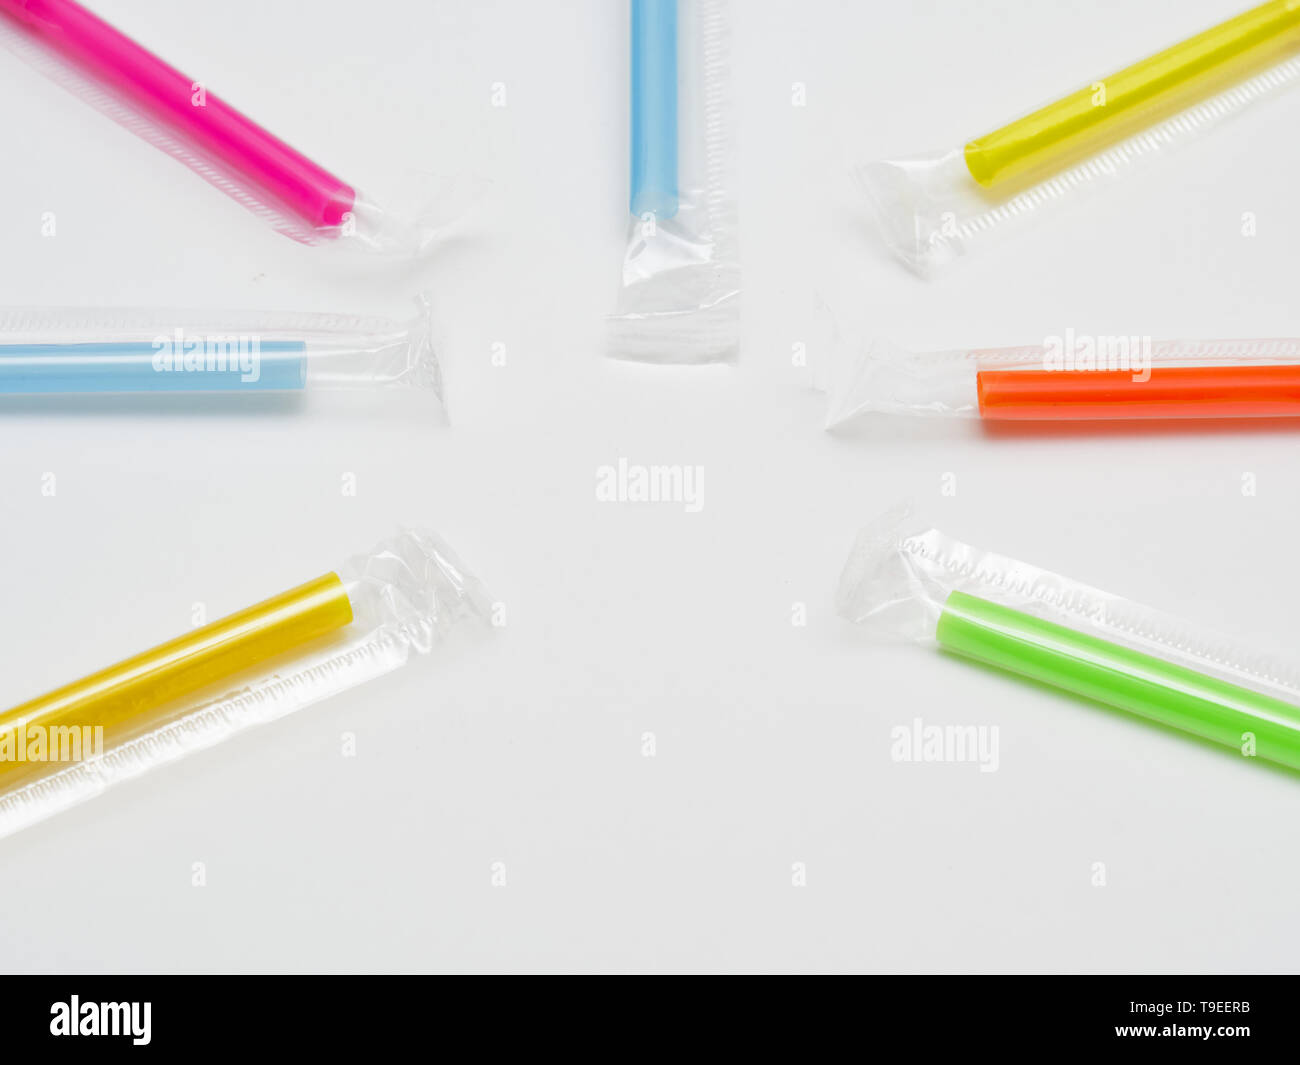 Many multicolored plastic straws forming a circle. Isolated on white background with empty space for caption. Plastic straws are being banned in vario Stock Photo